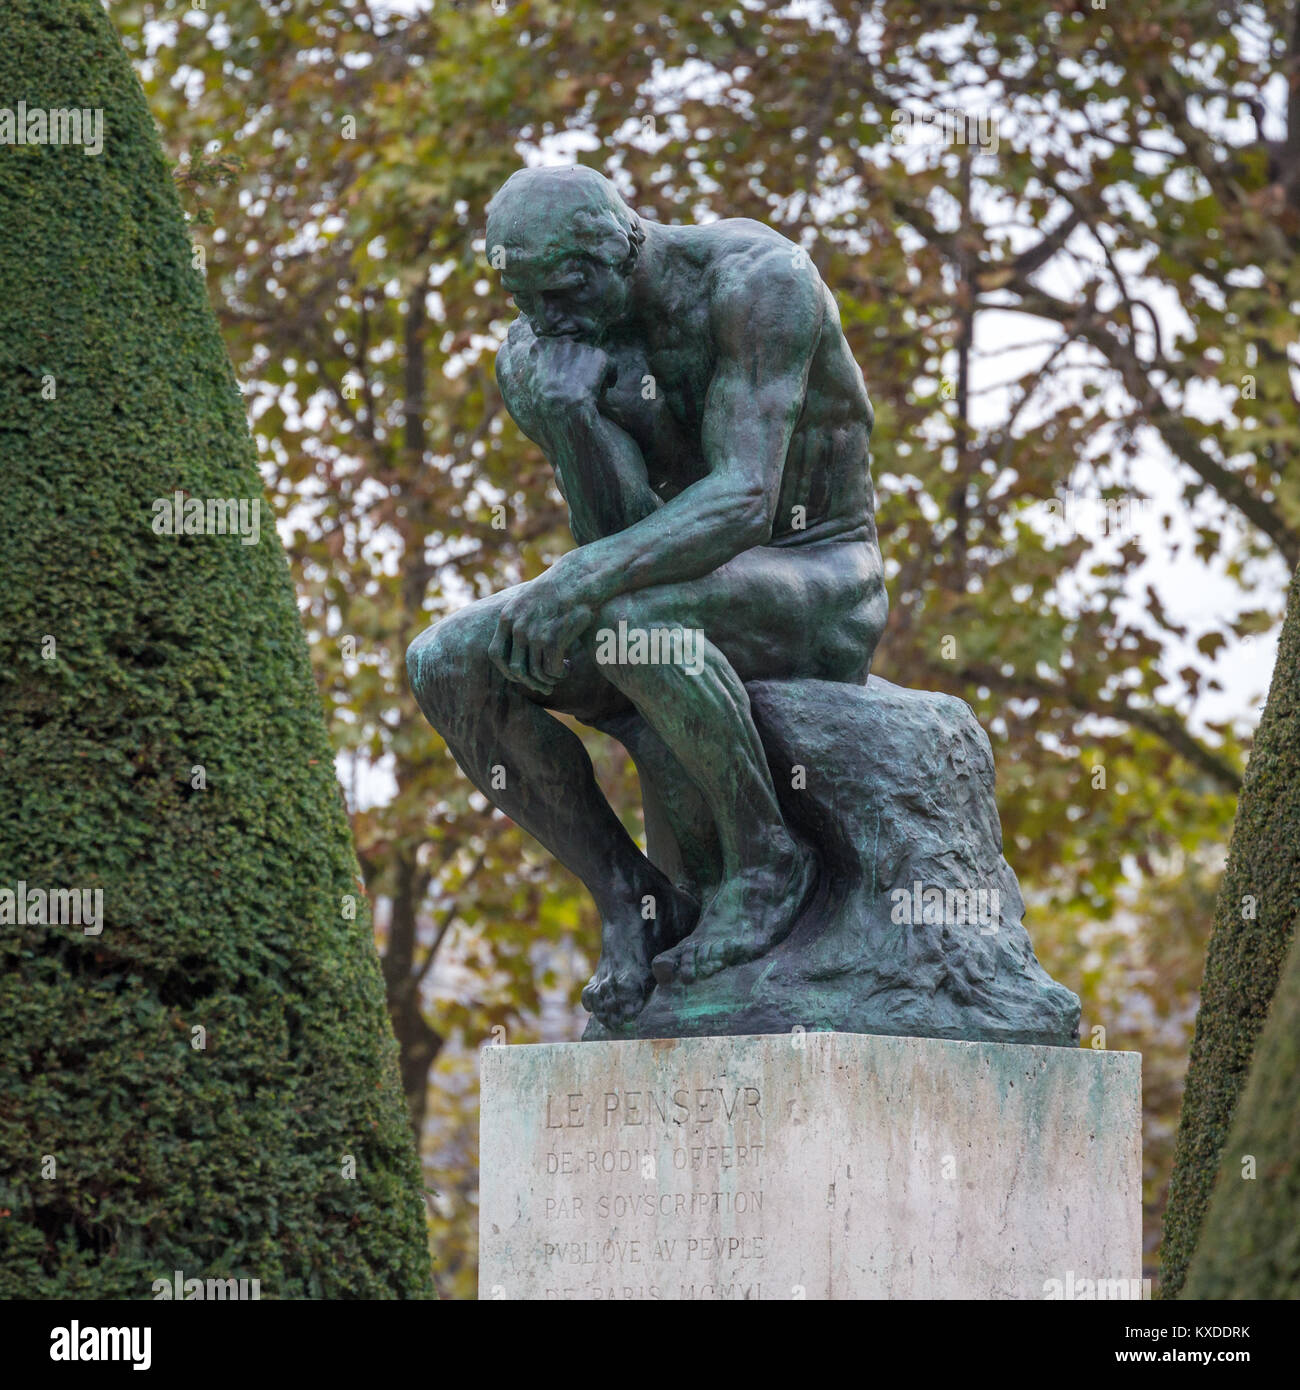 Bronze sculpture The Thinker by Auguste Rodin,Garden of the Rodin Museum,Paris,France Stock Photo